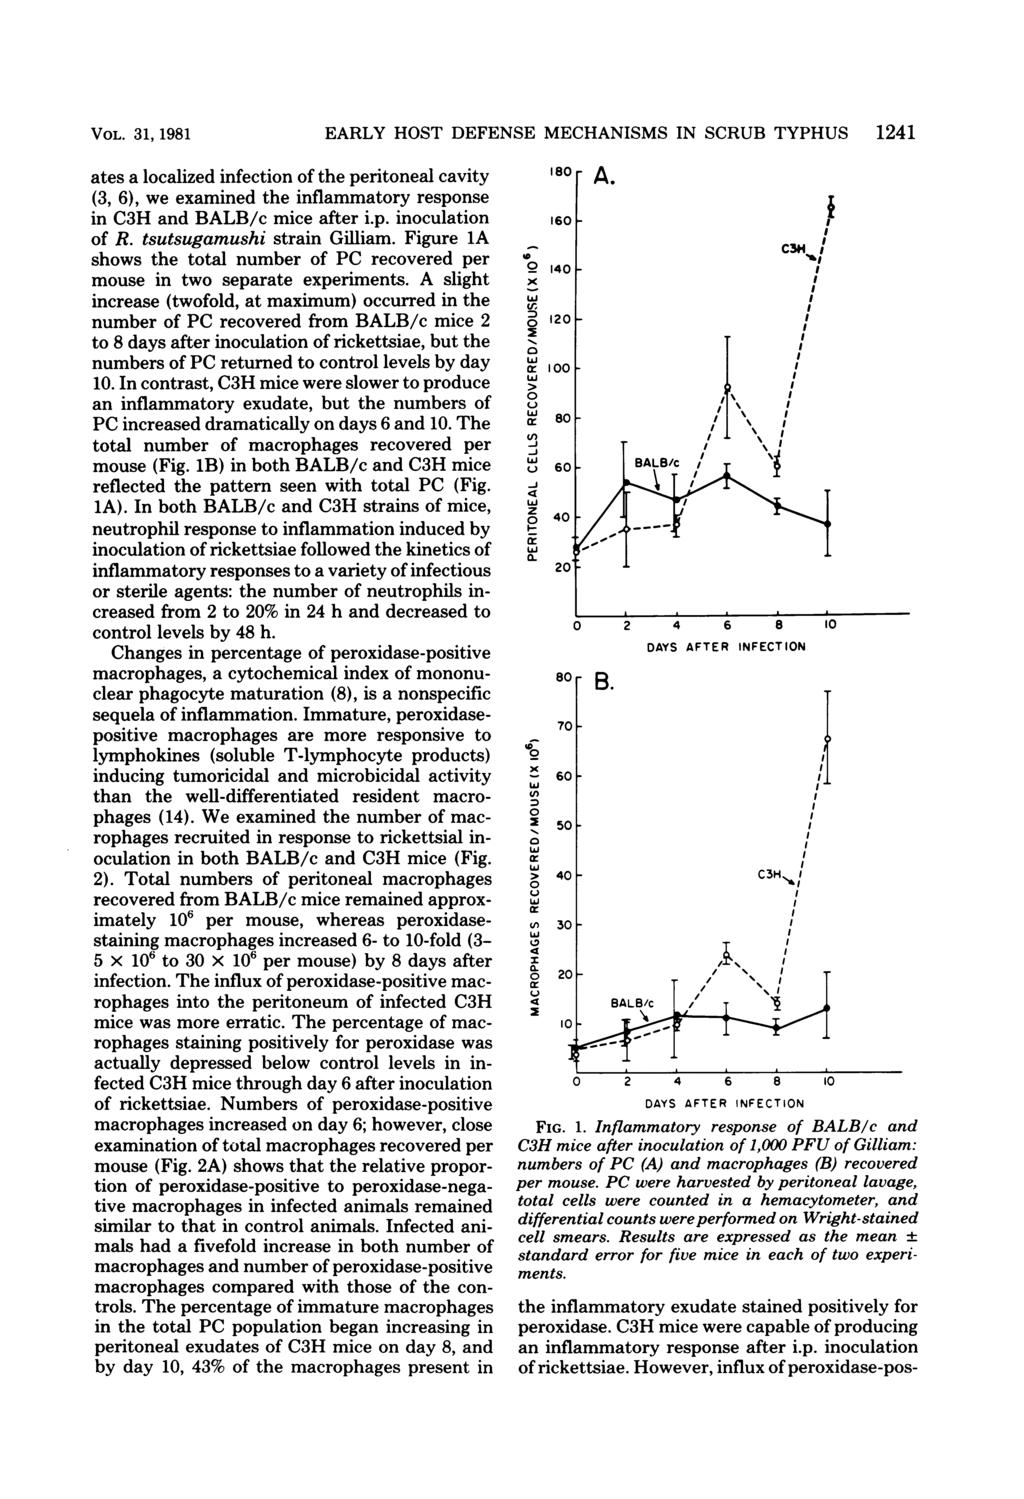 VOL. 31, 1981 ates a localized infection of the peritoneal cavity (3, 6), we examined the inflammatory response in C3H and BALB/c mice after i.p. inoculation of R. tsutsugamushi strain Gilliam.